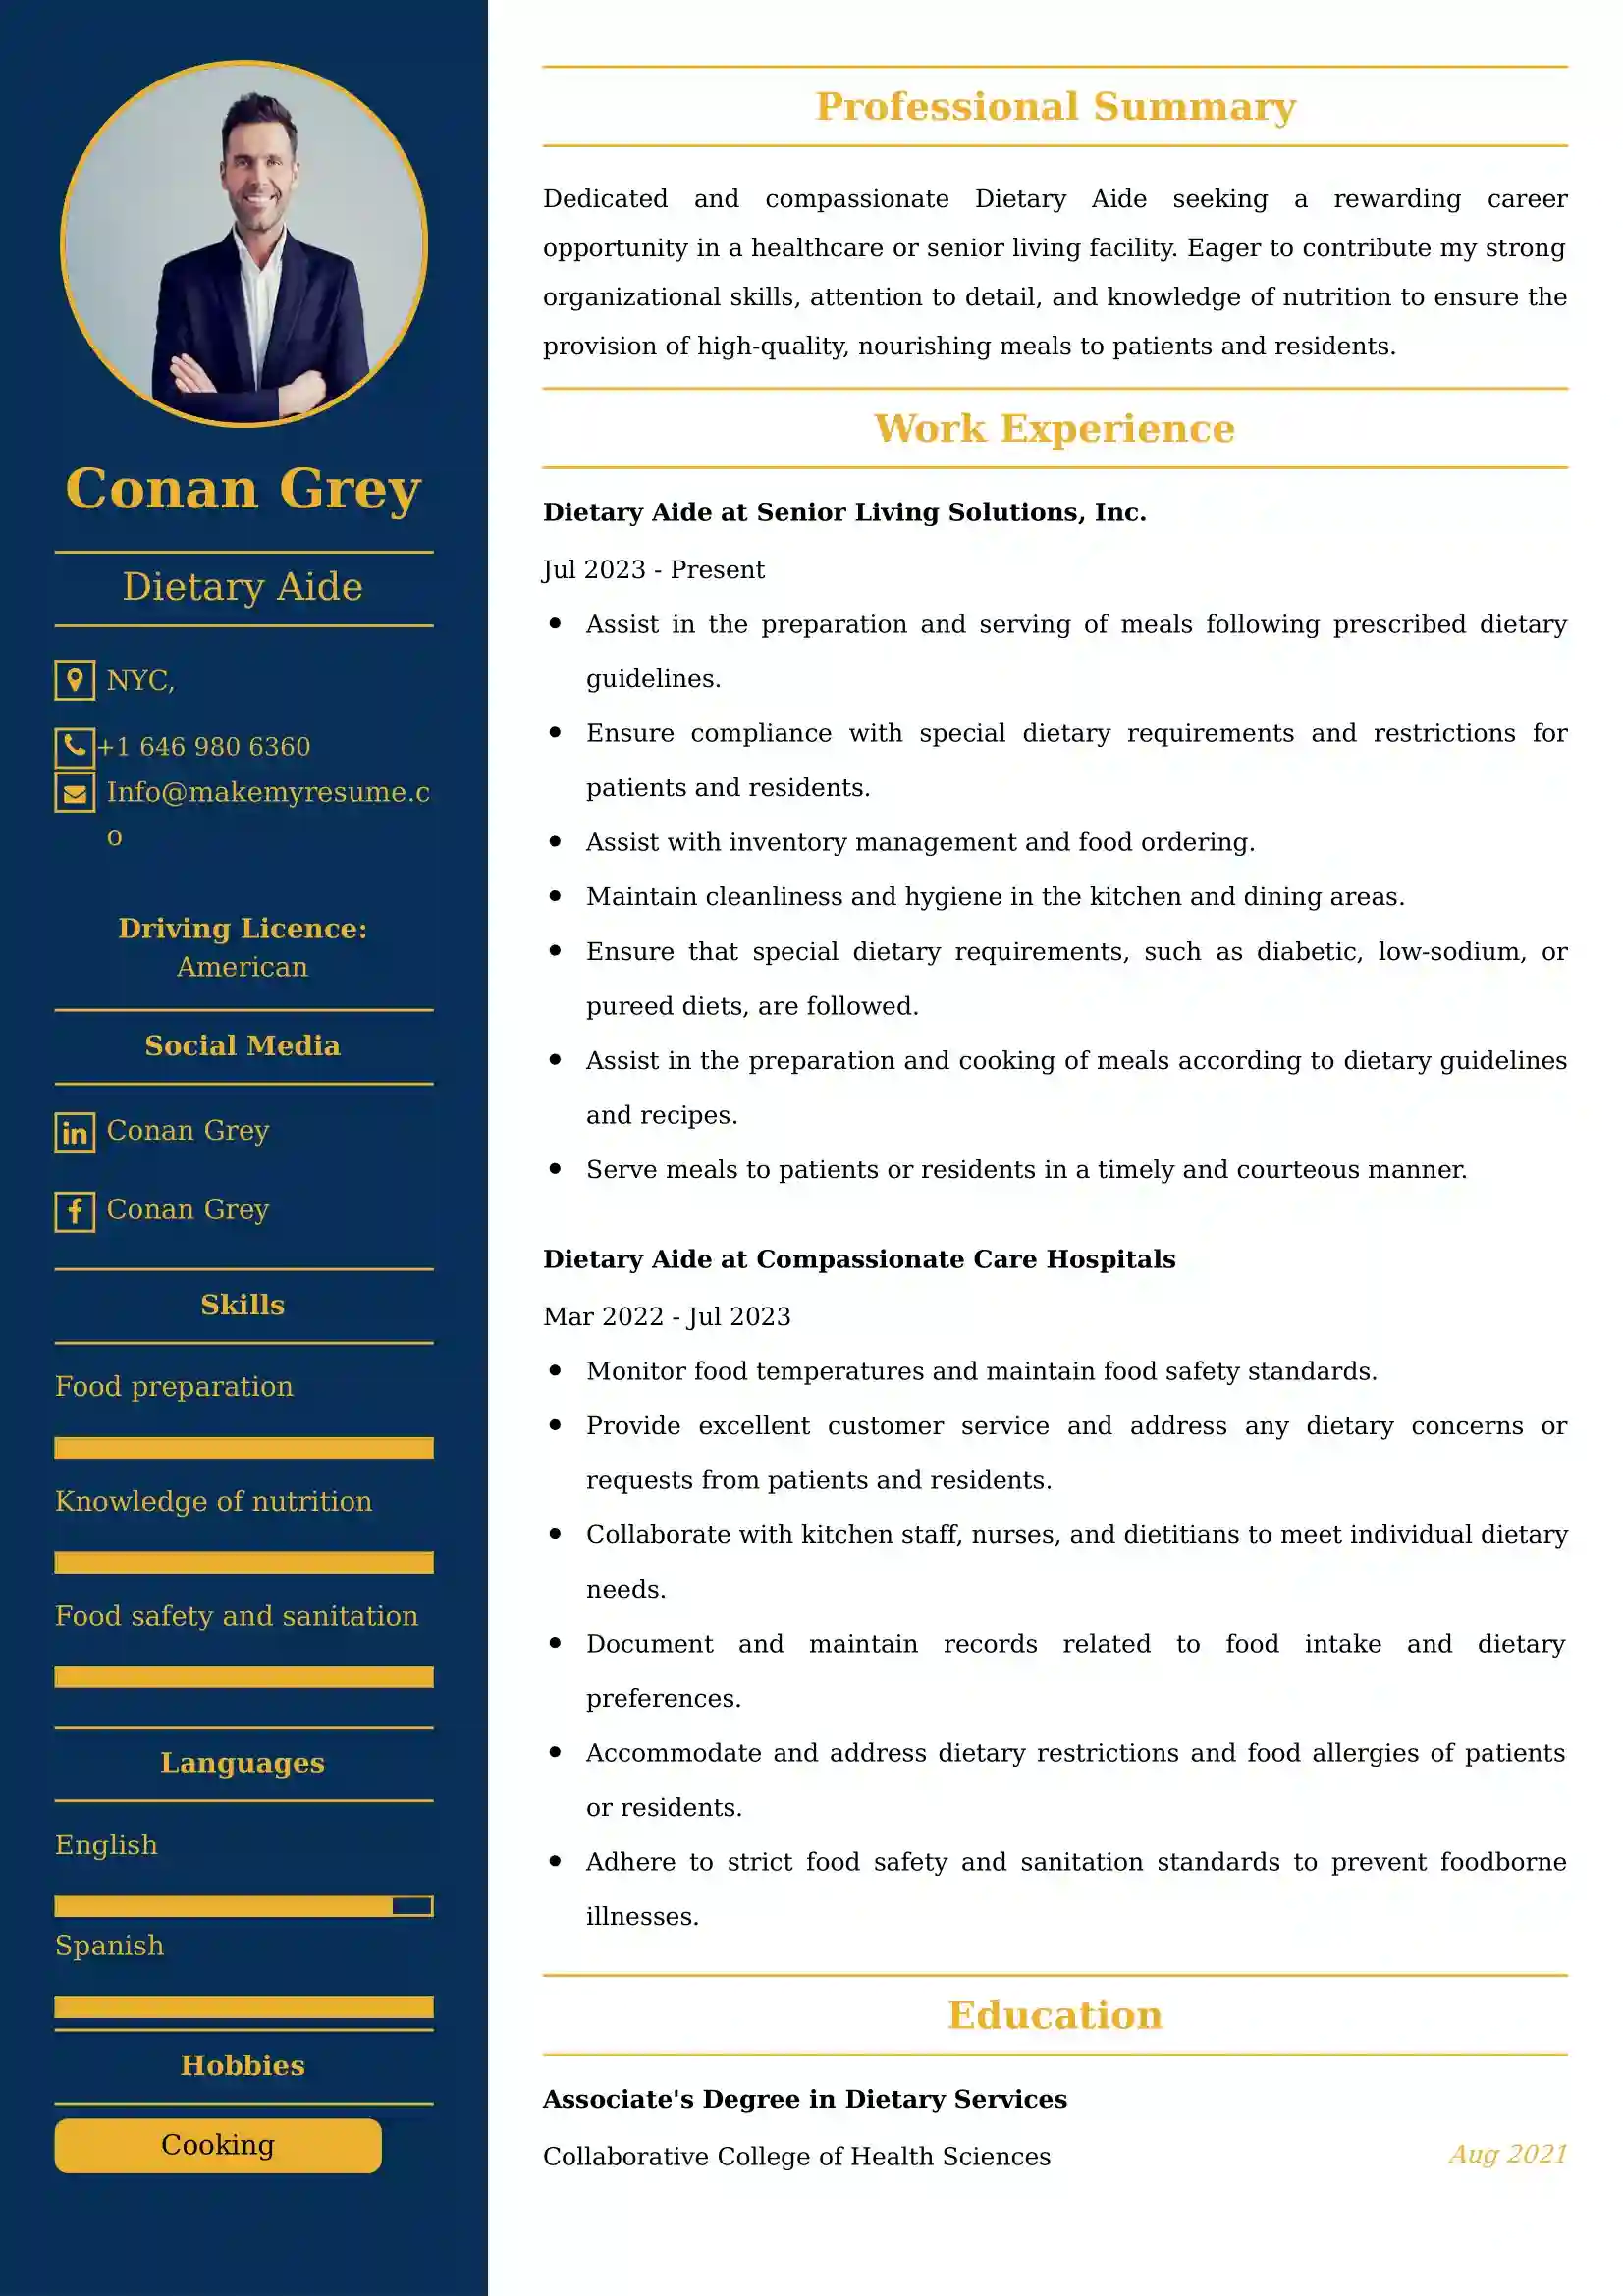 Dietary Aide Resume Examples - UK Format, Latest Template.